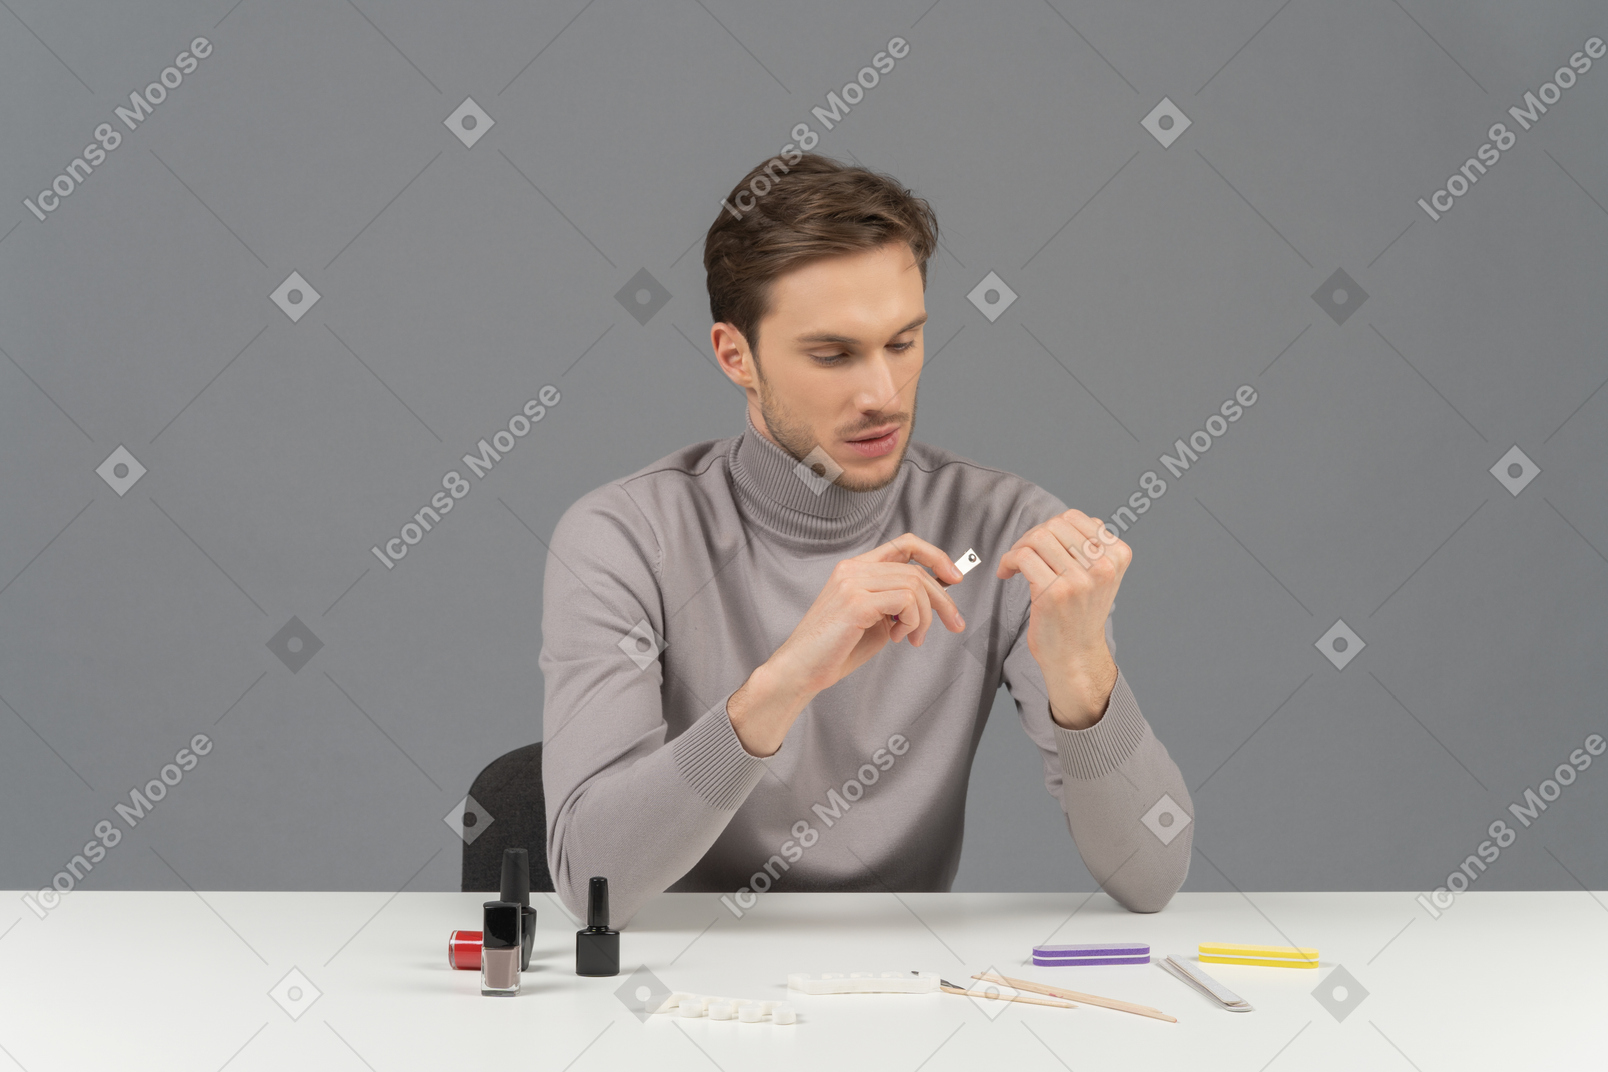 A young man attentively arranging his nails